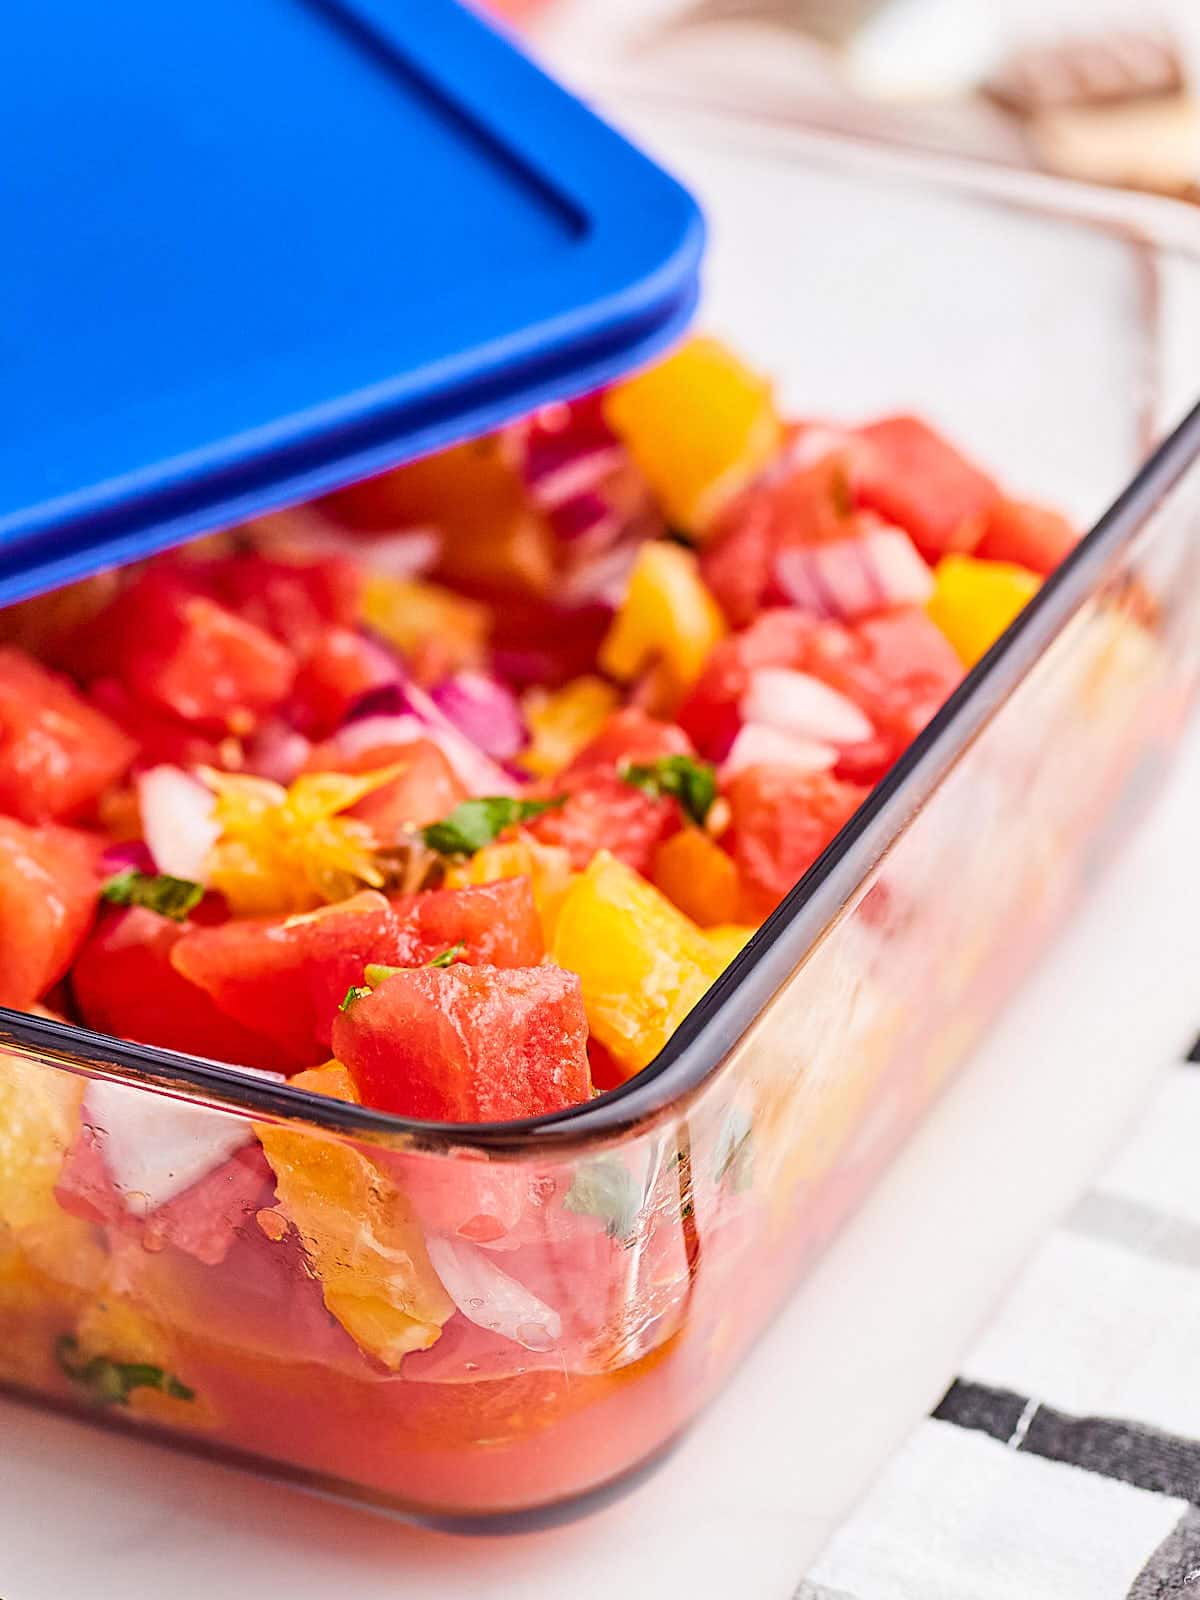 Transferring the Watermelon and Orange Salad into an airtight storage container.